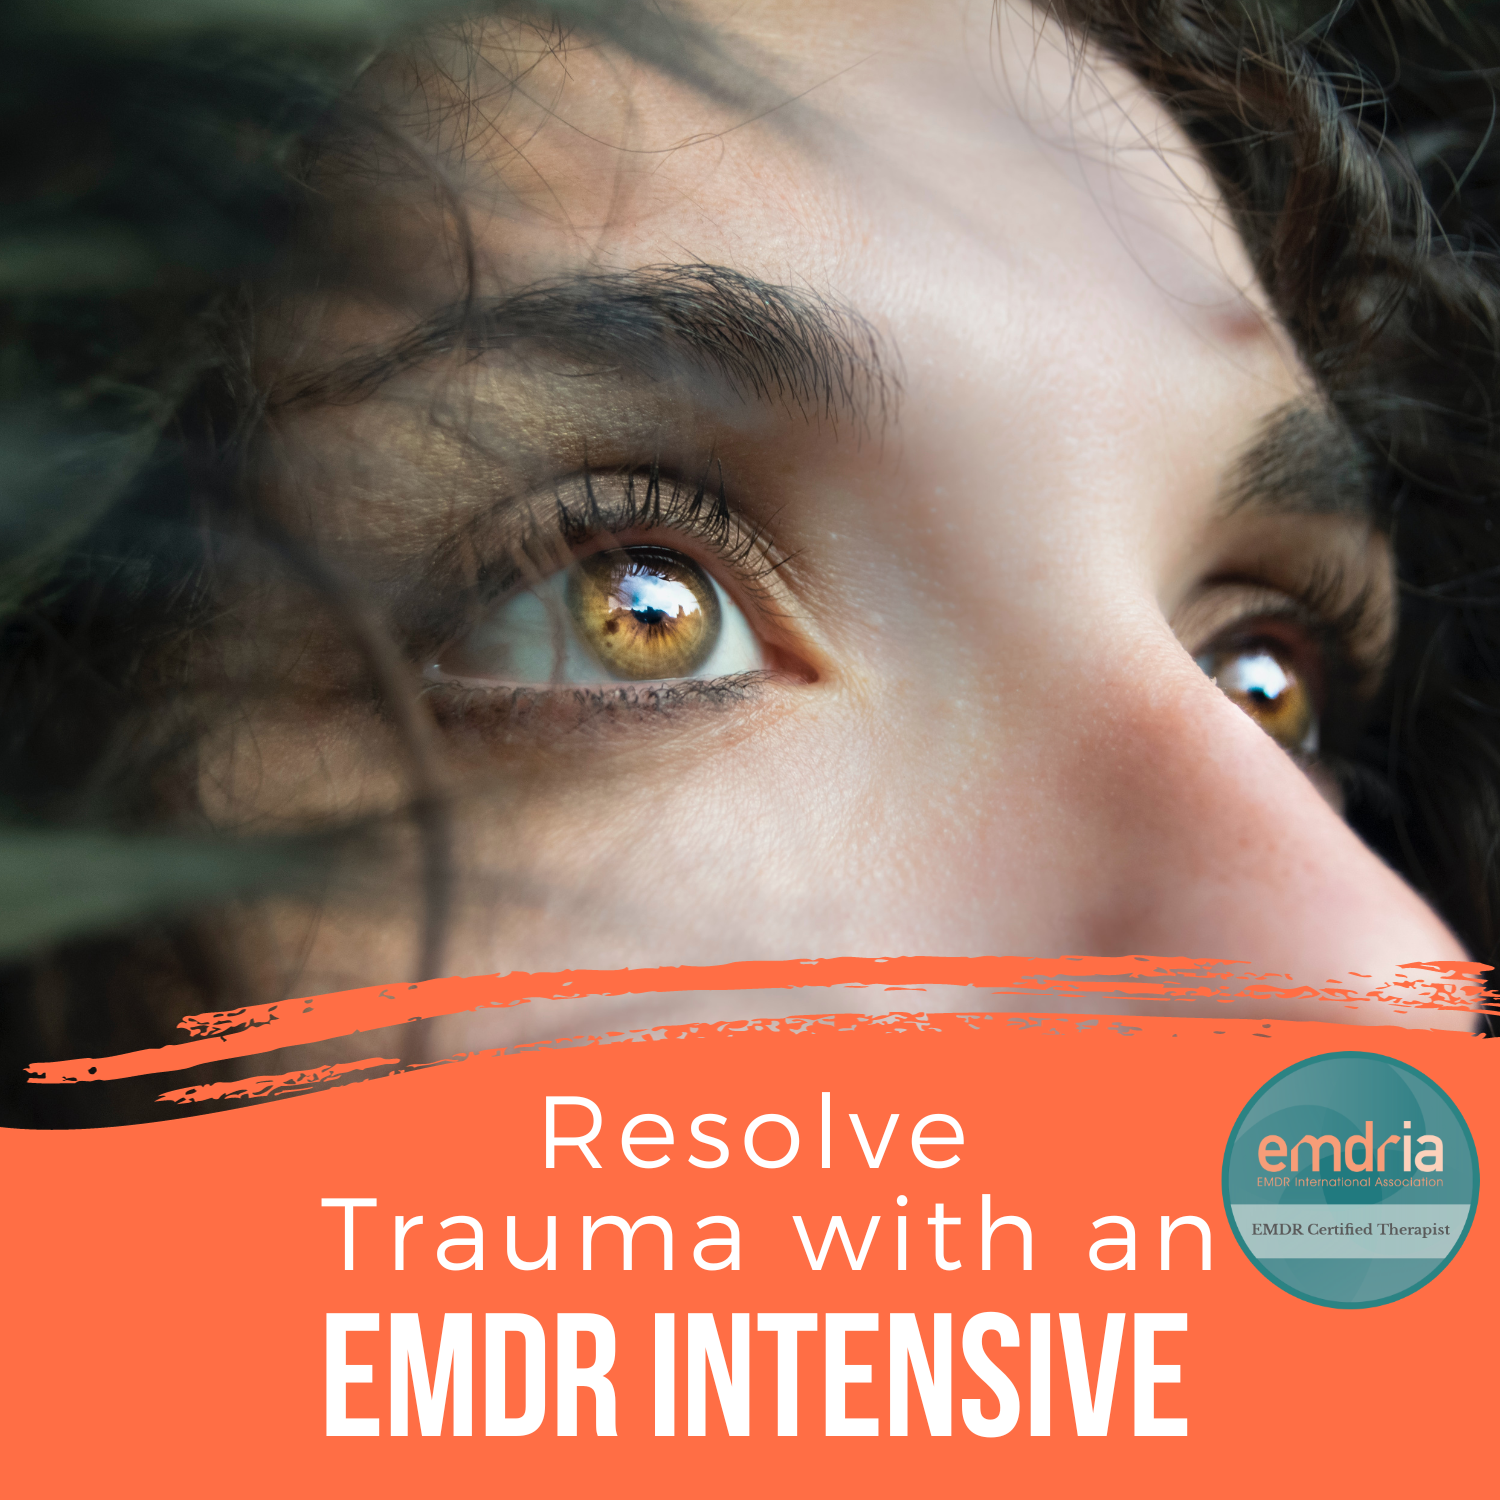 EMDR Intensive Therapy is a powerful way to accelerate the healing that you would experience in a typical EMDR session.